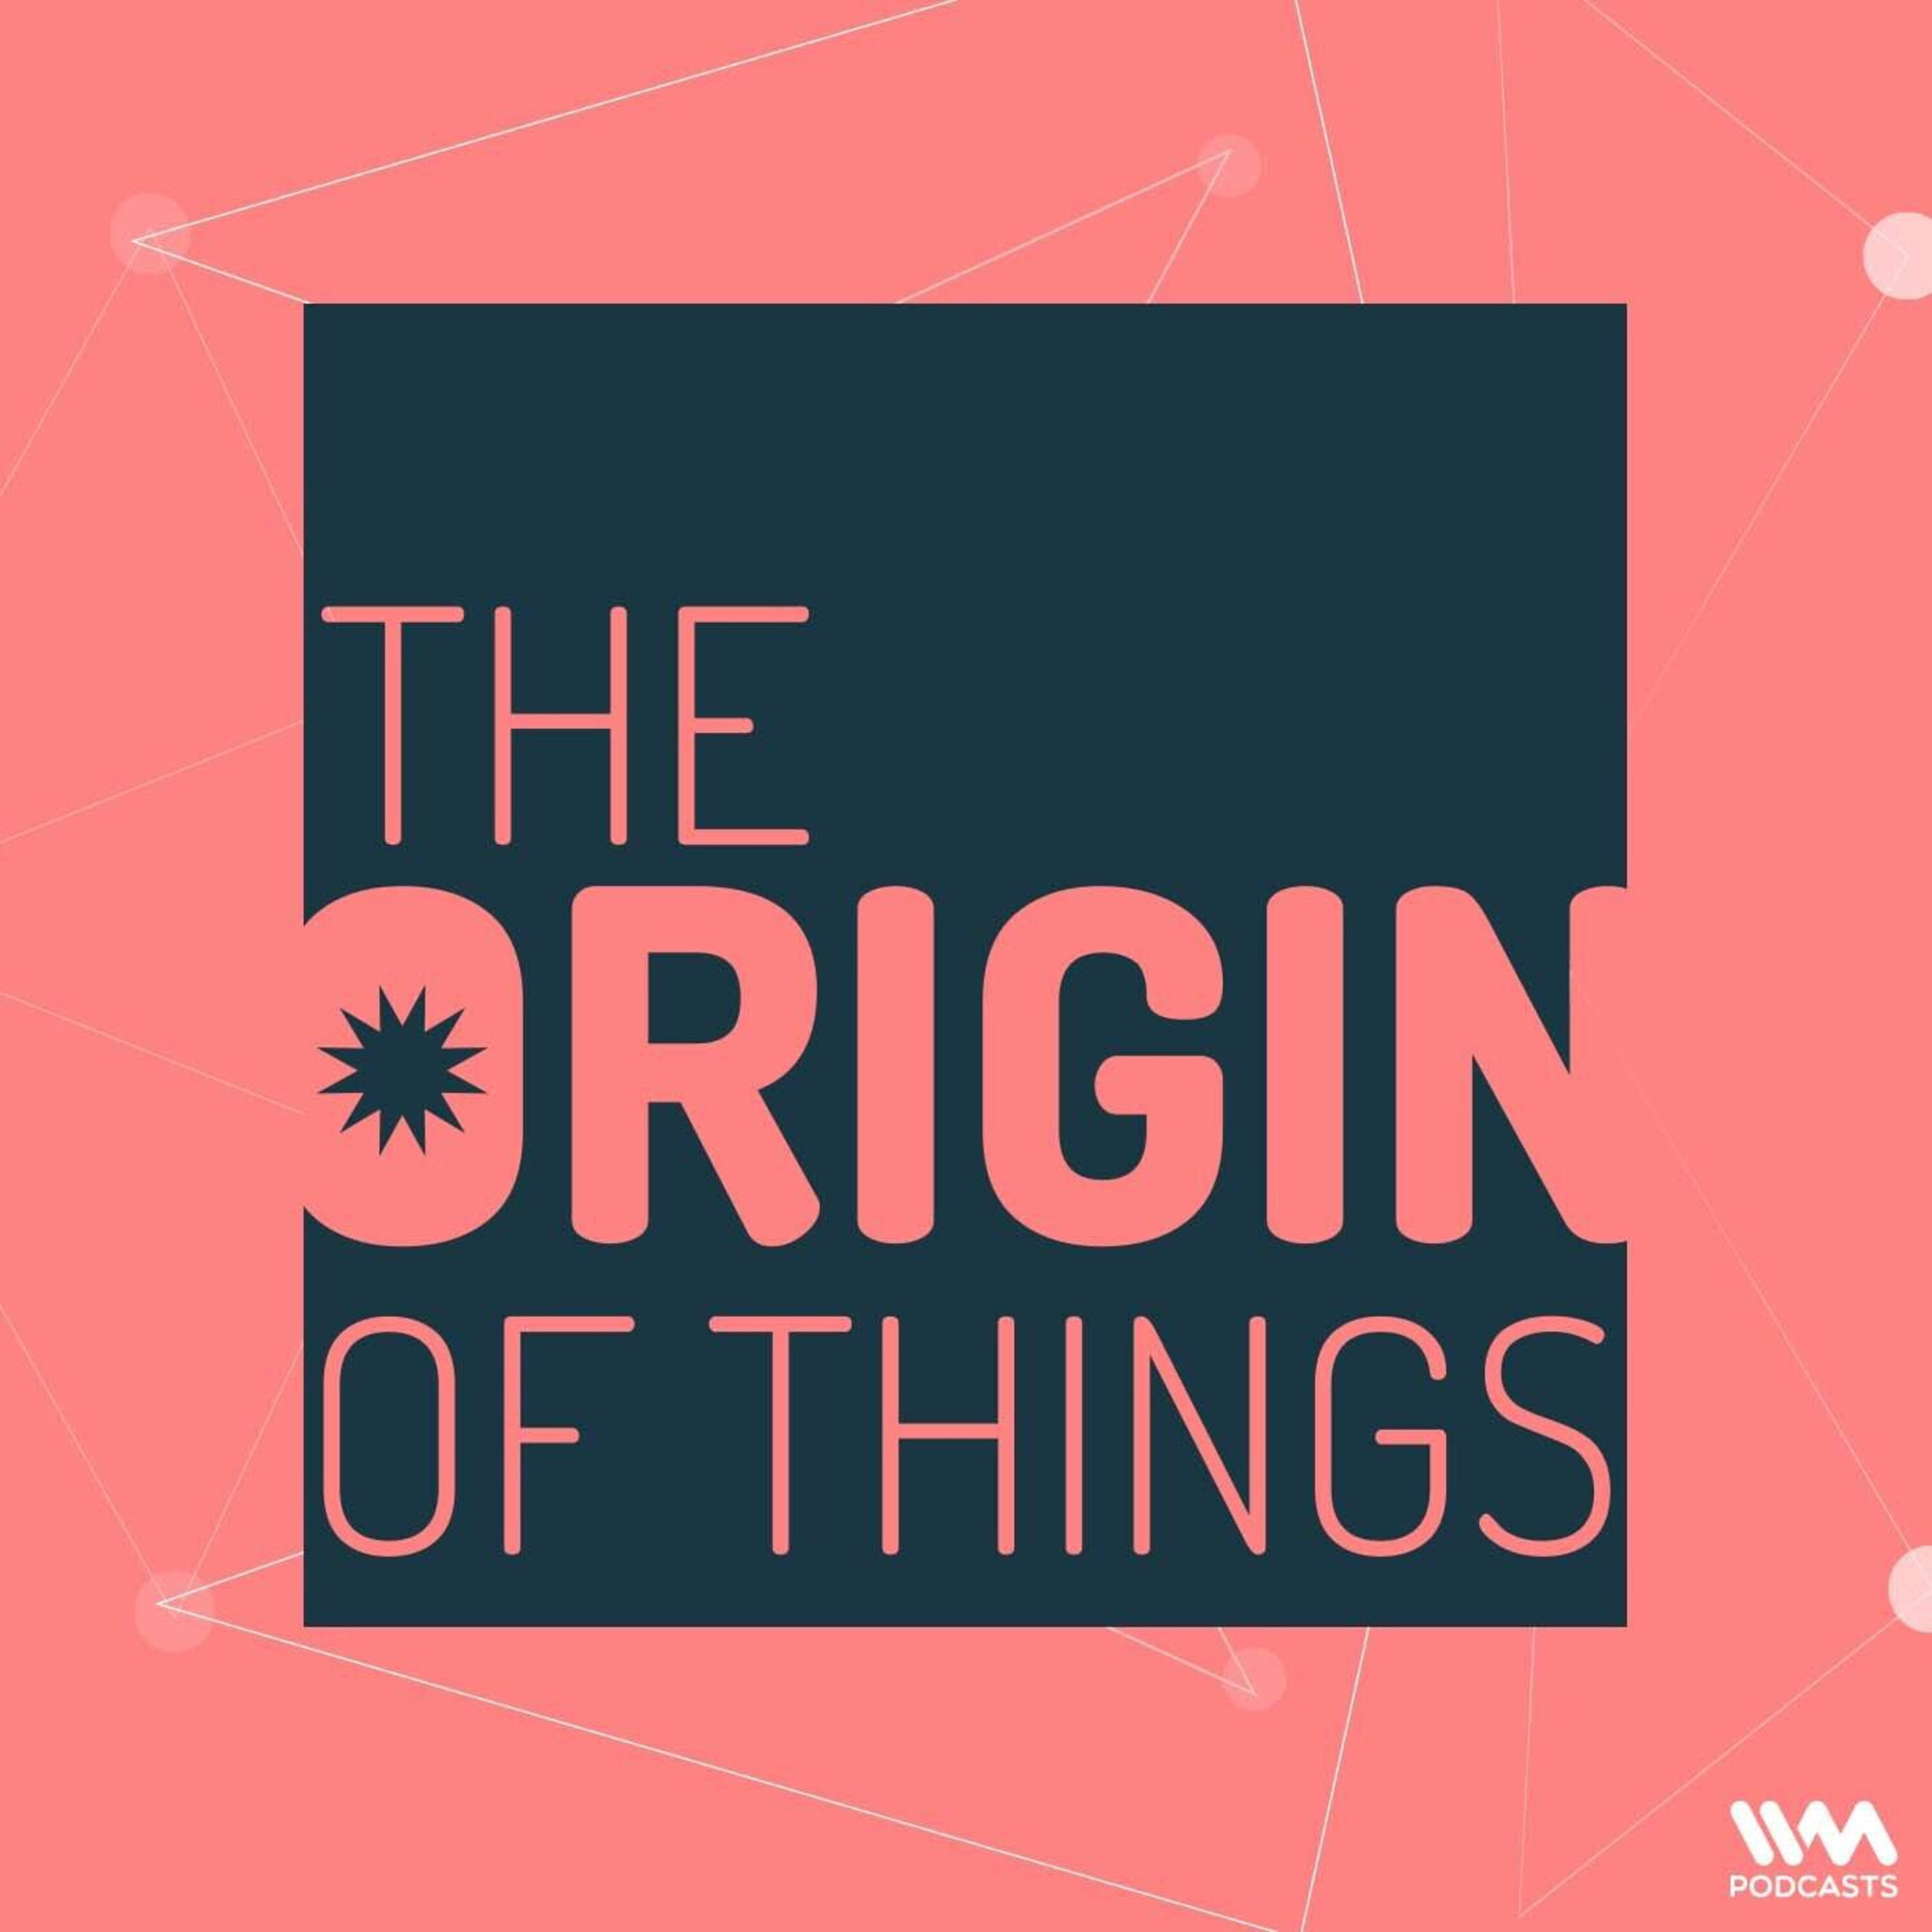 The Origin Of Things:IVM Podcasts